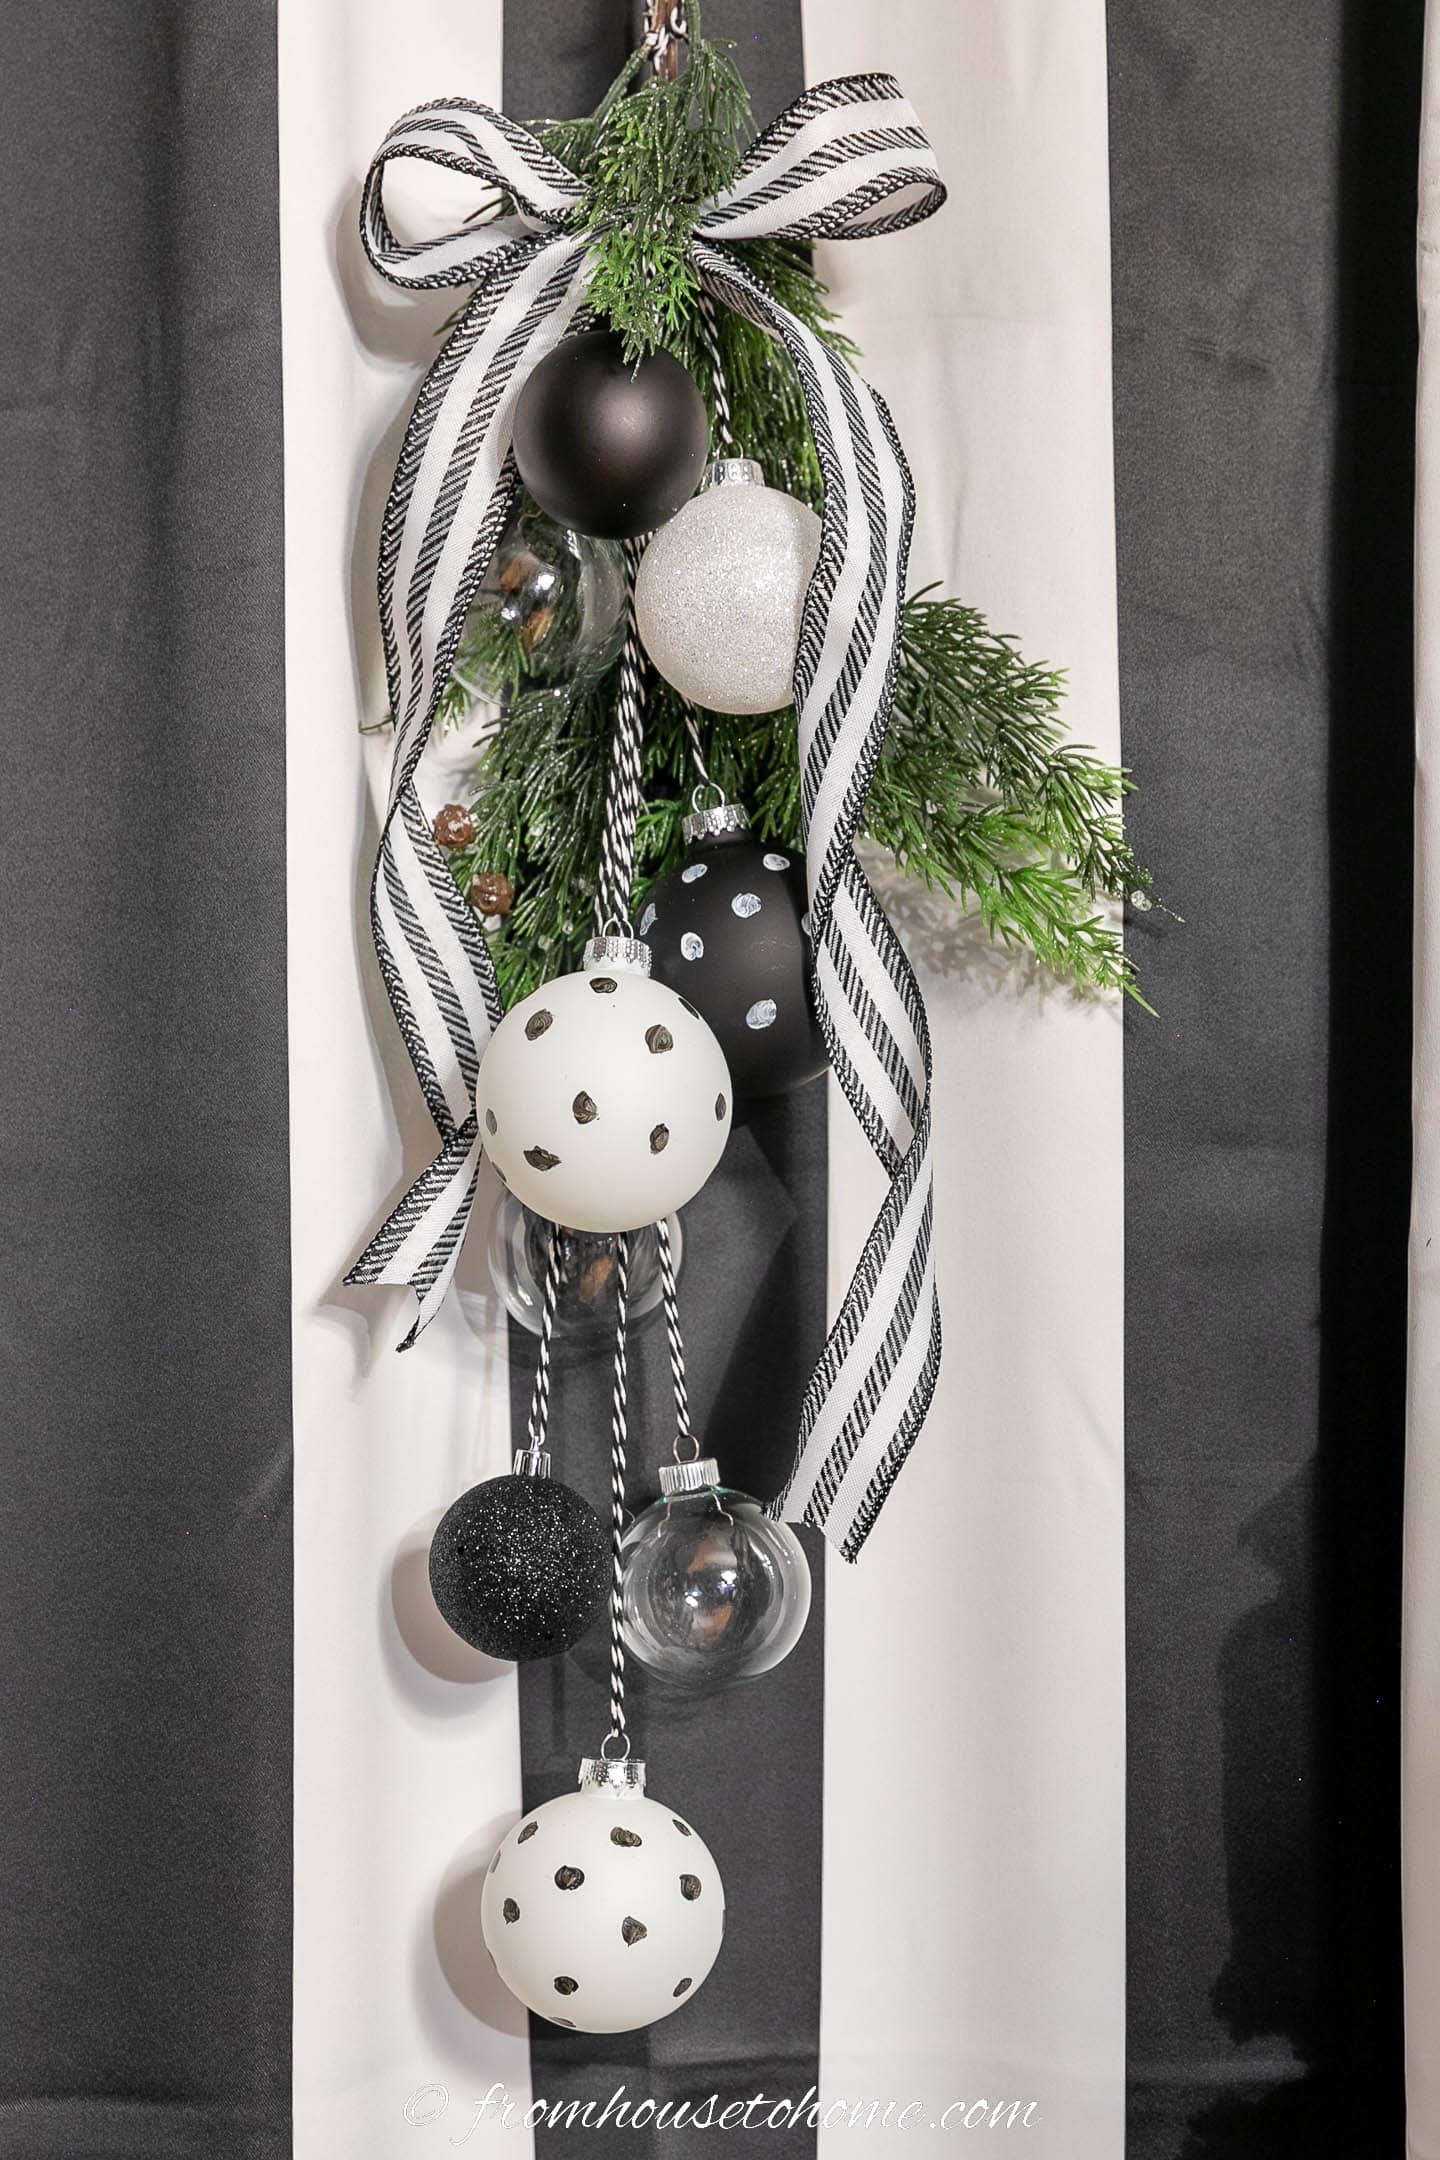 The finished DIY black and white Christmas swag hung in front of a window with black and white curtains